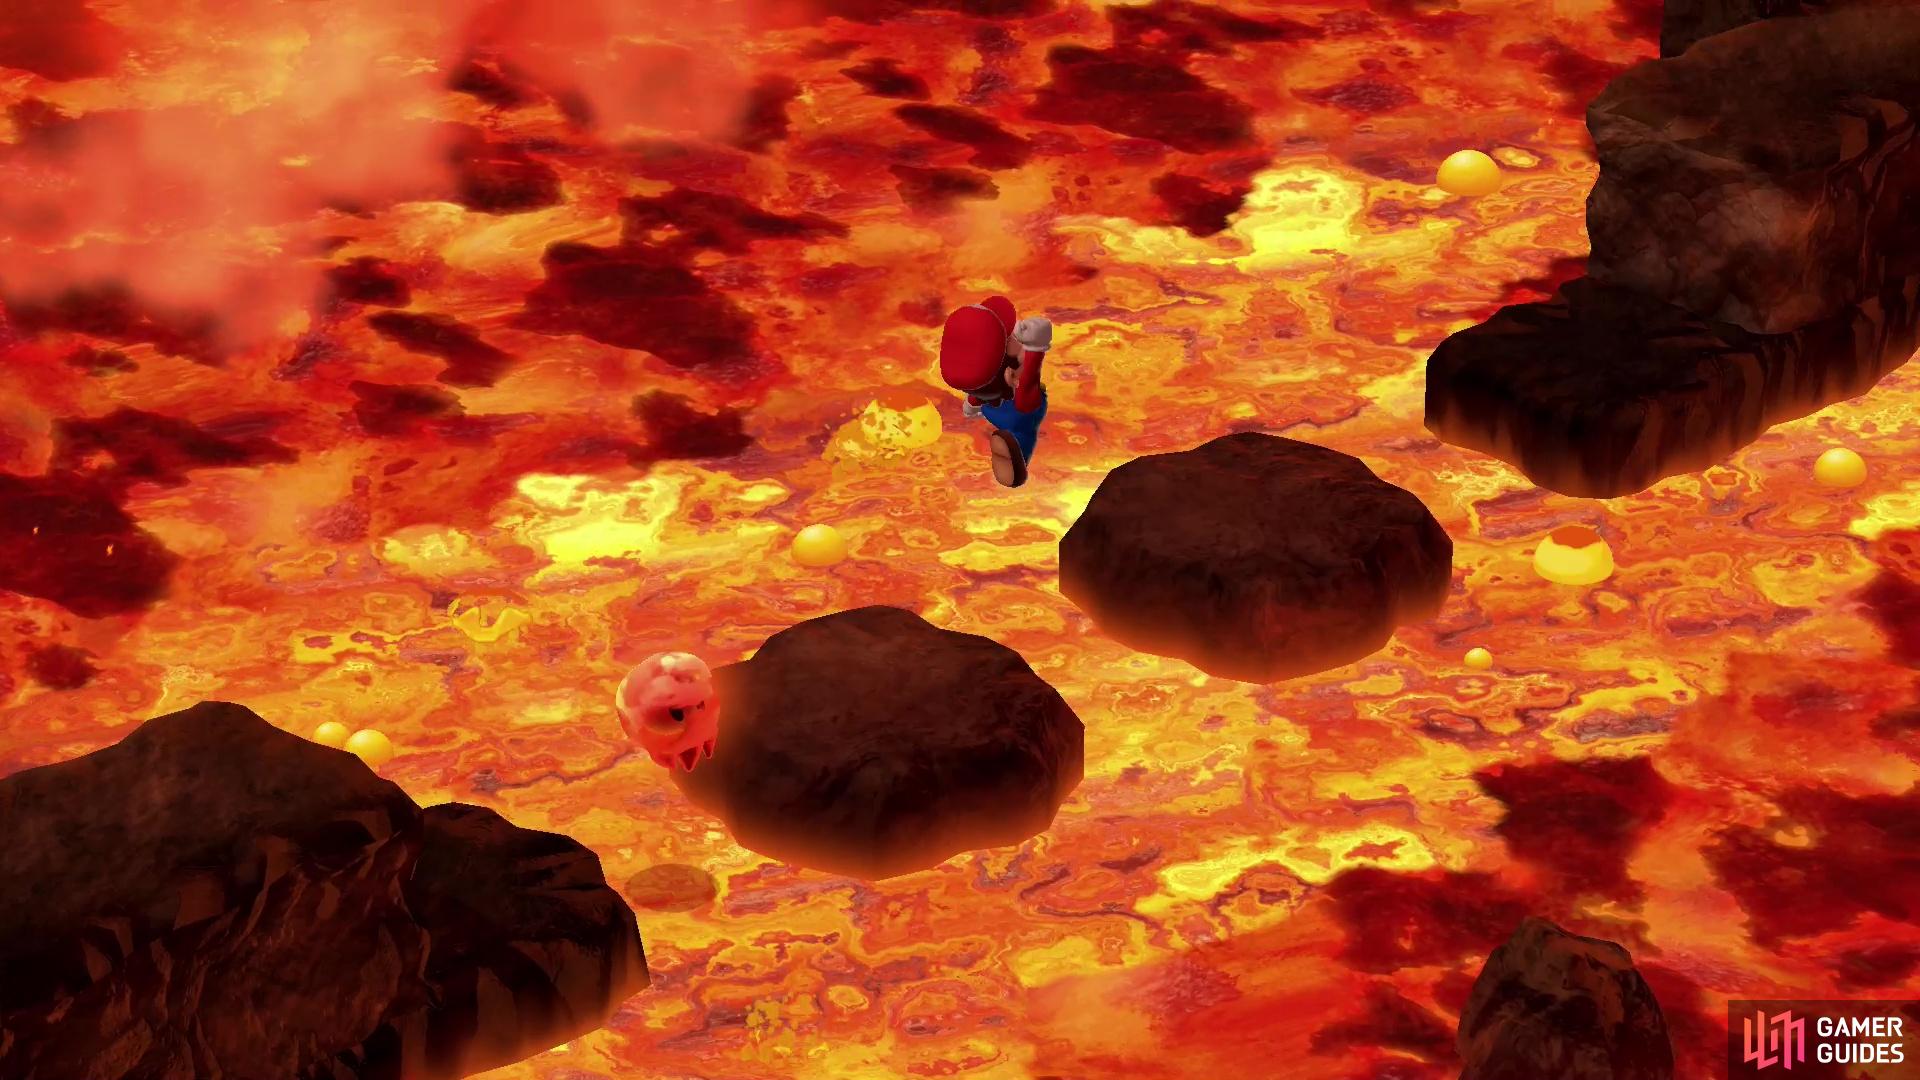 Jump from platform to platform, being wary of Lava Bubble enemies as you go.